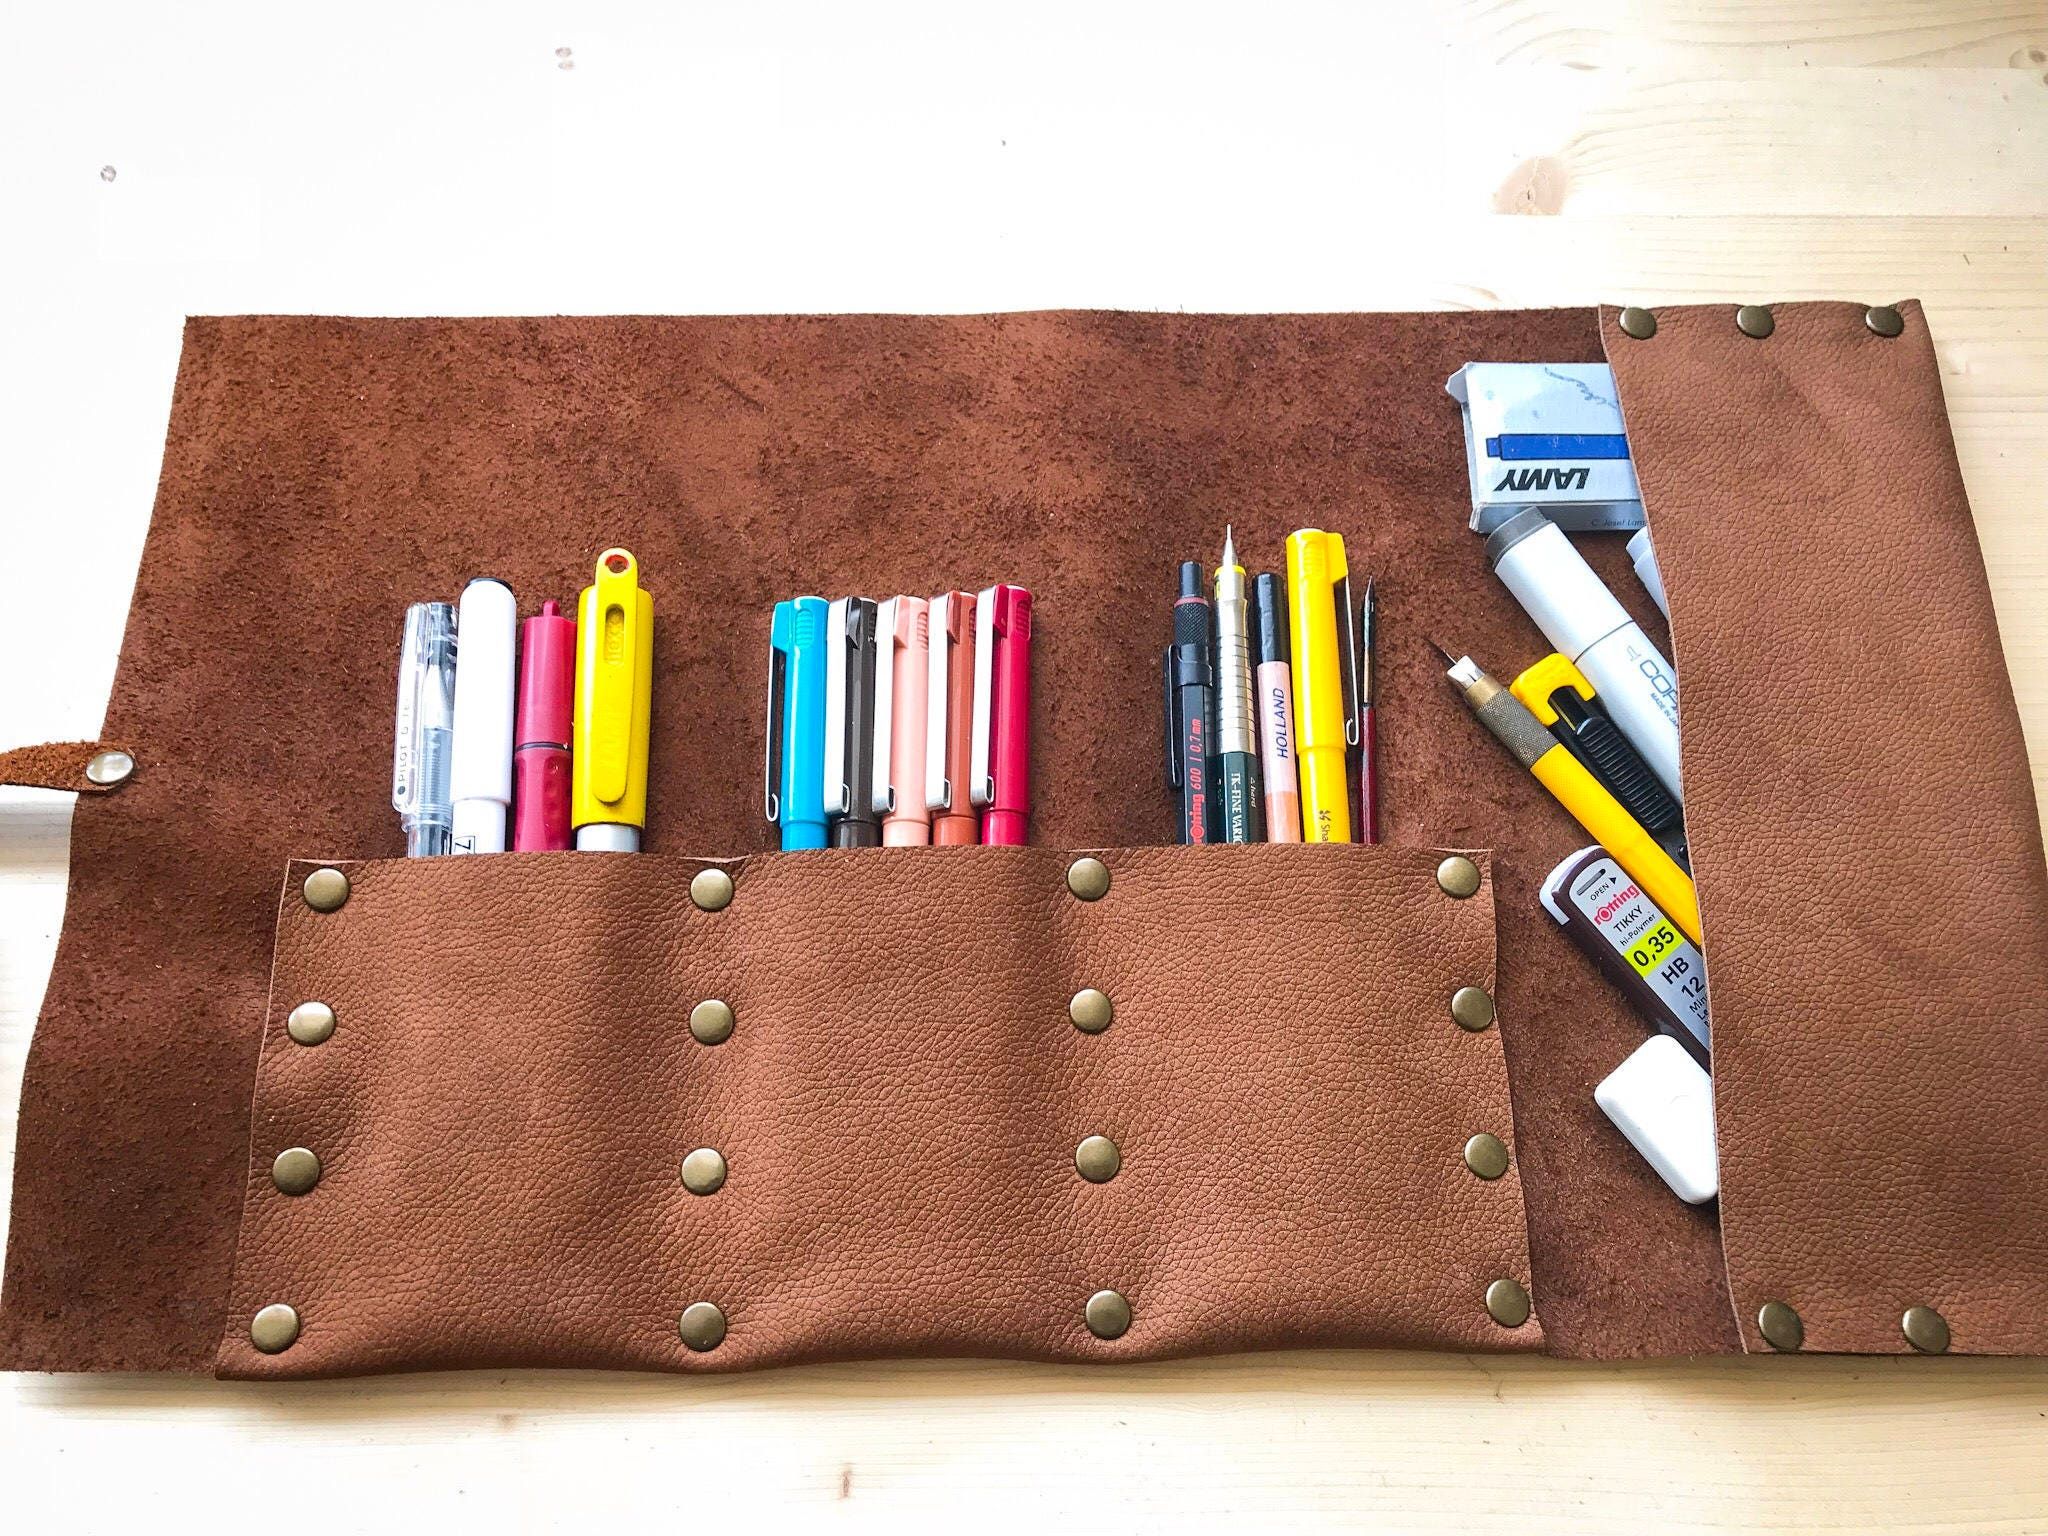  ECHSRT Leather Pencil Case Roll Up Bag Pencil Pouch Wrap  Foldable Tool Roll Supplies Art Stuff Organizer Vintage Gift for Office  Artist